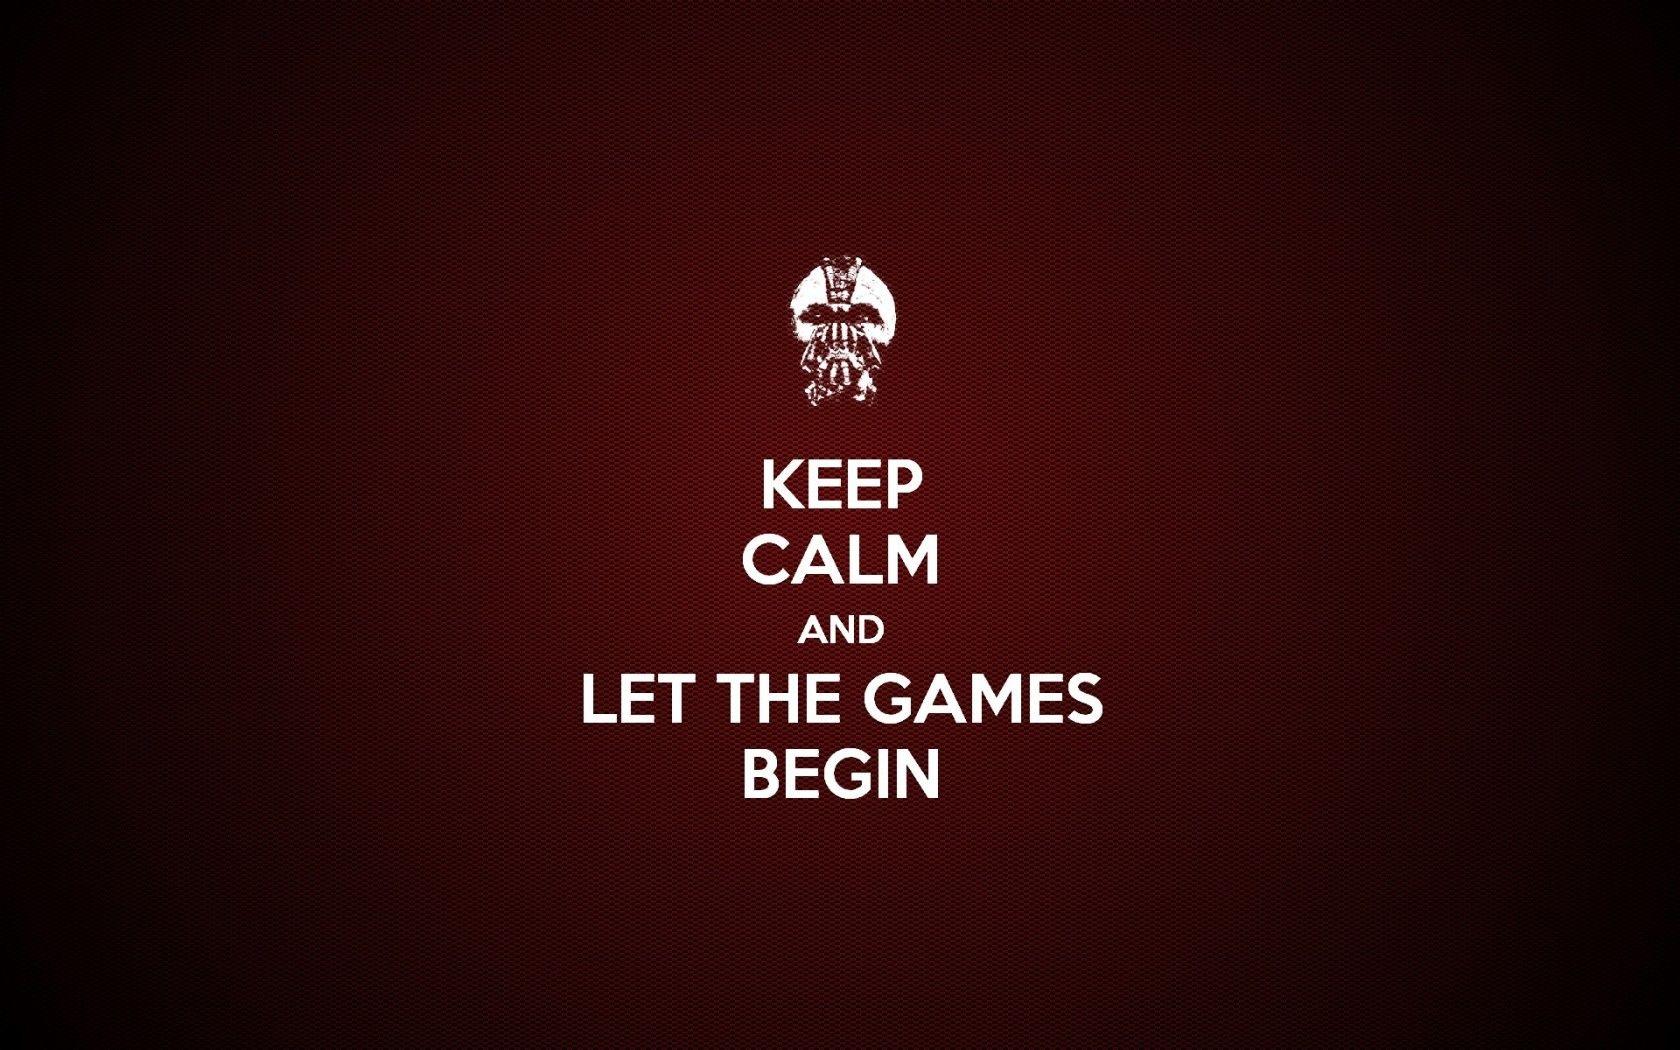 Keep Calm Play Game Quotes Background HD Wallpaper. Game quotes